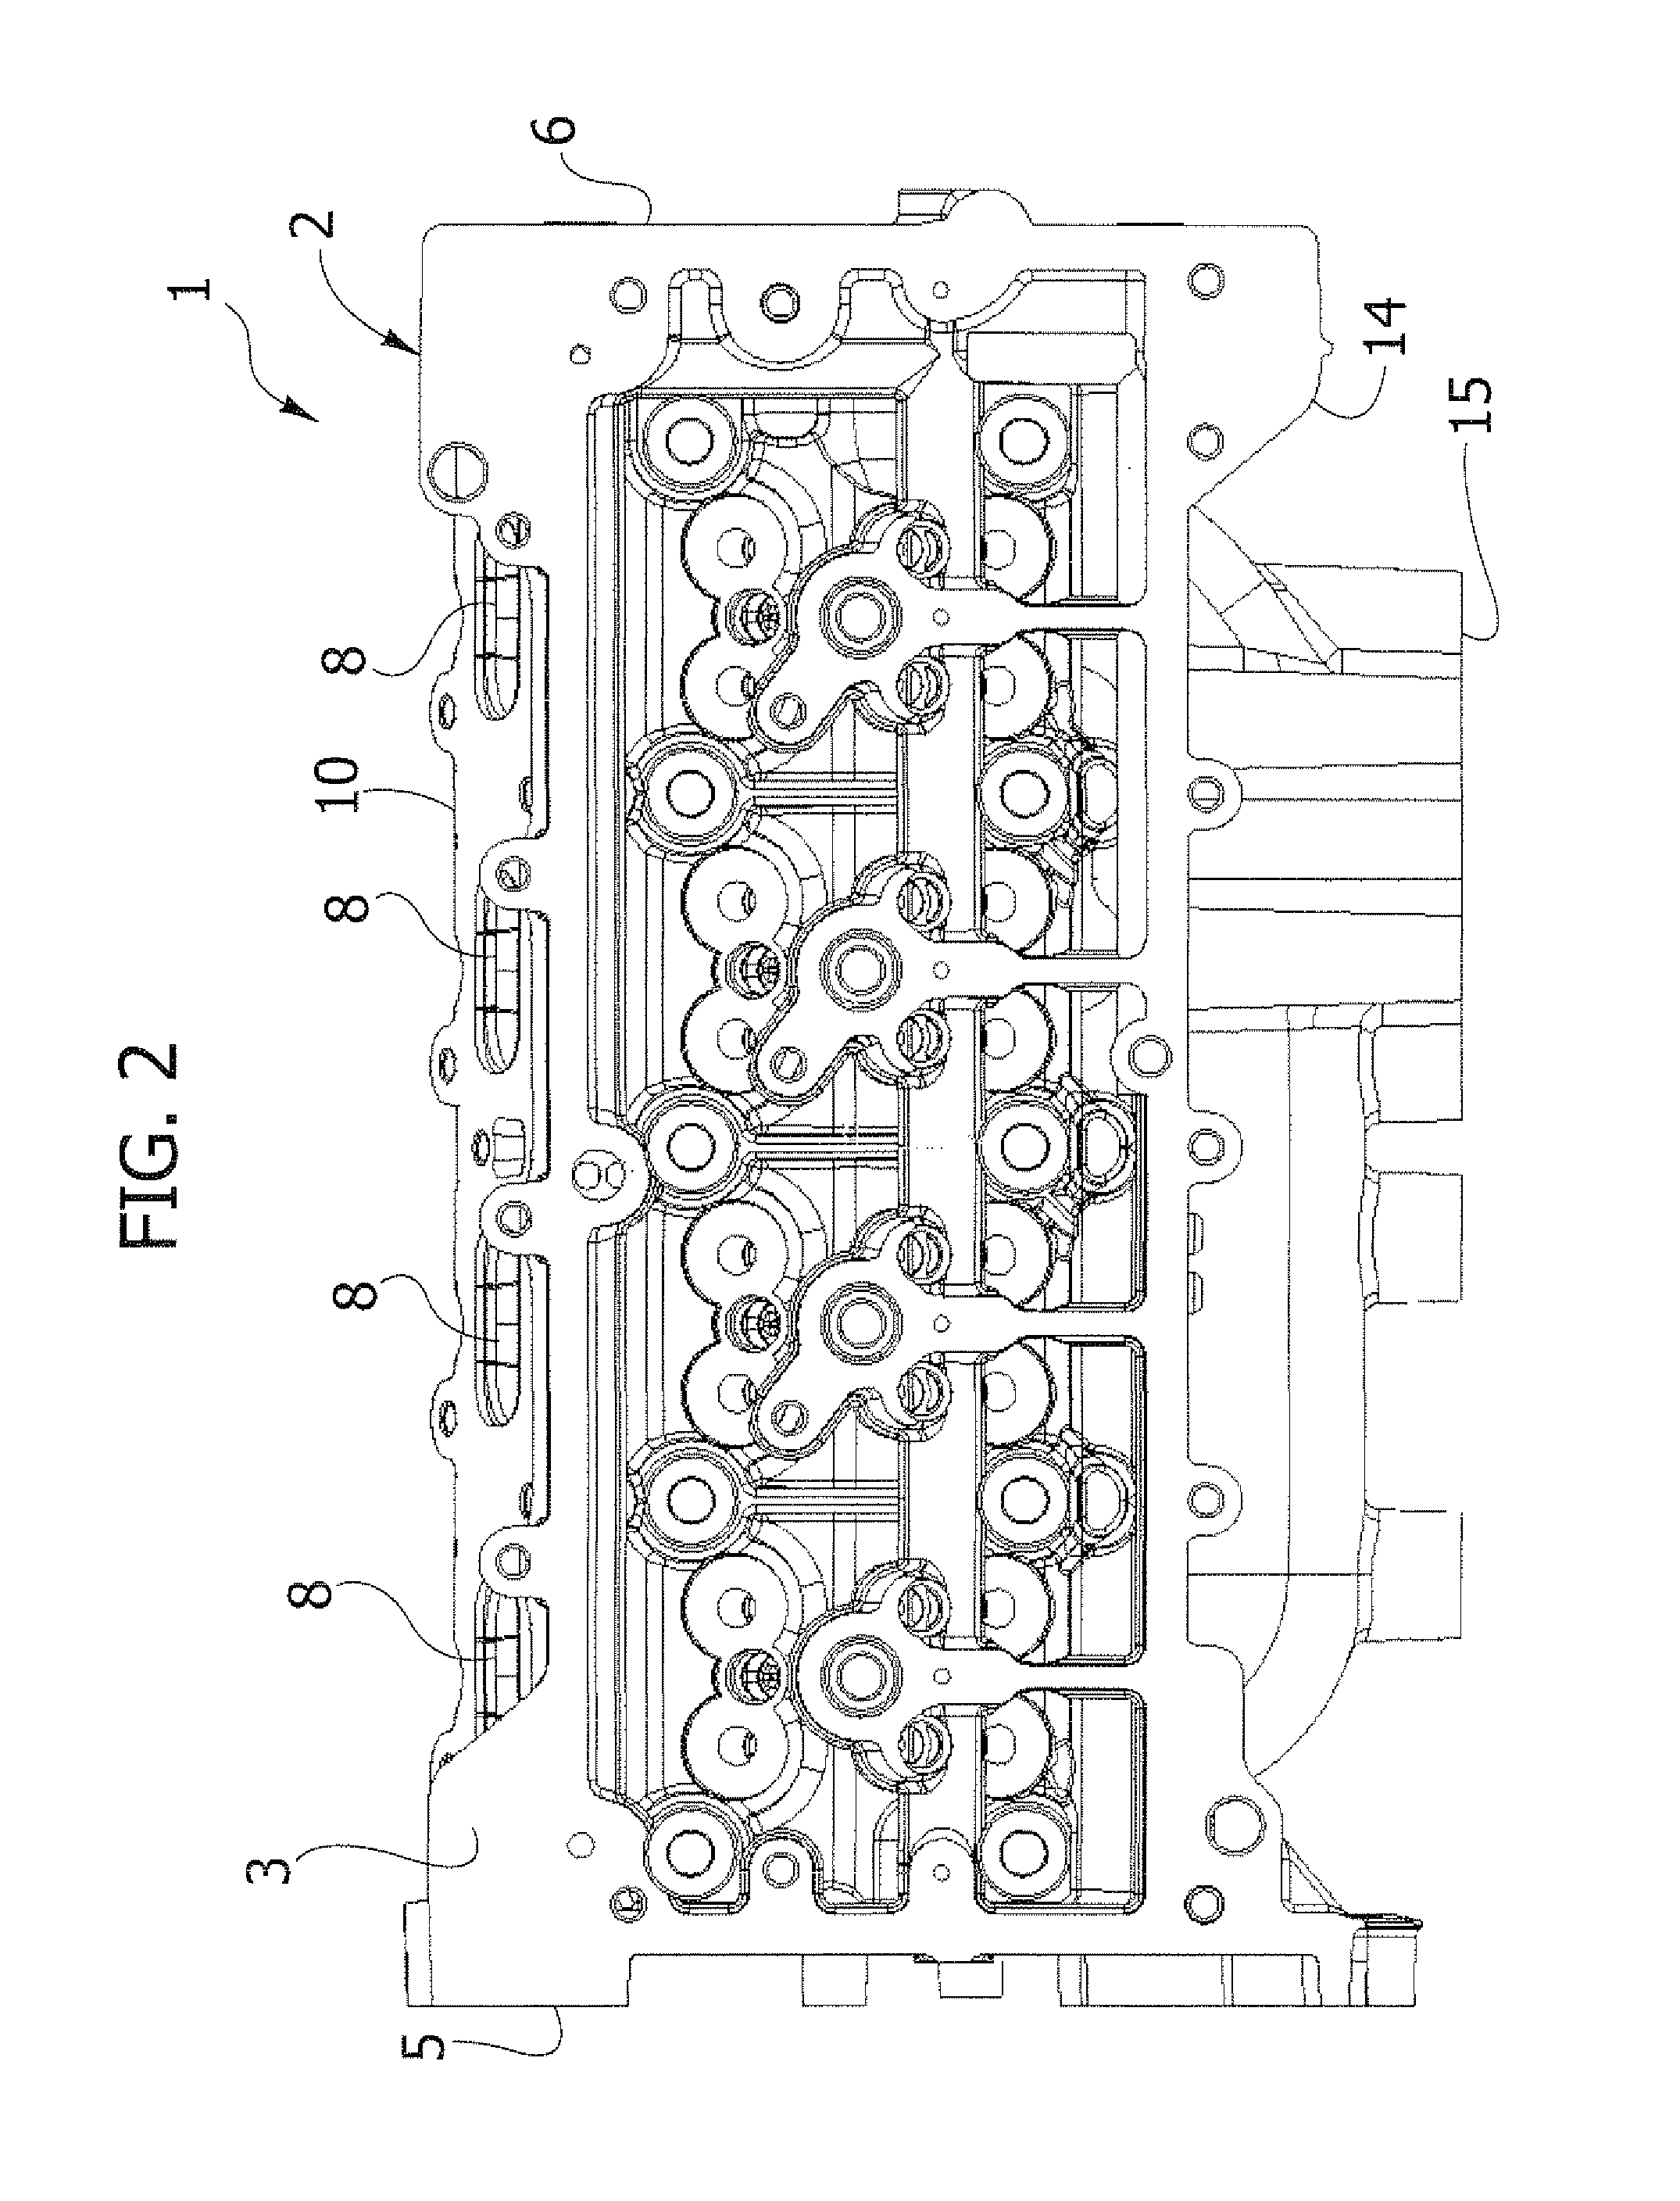 Cylinder head for an internal combustion engine, with integrated exhaust manifold